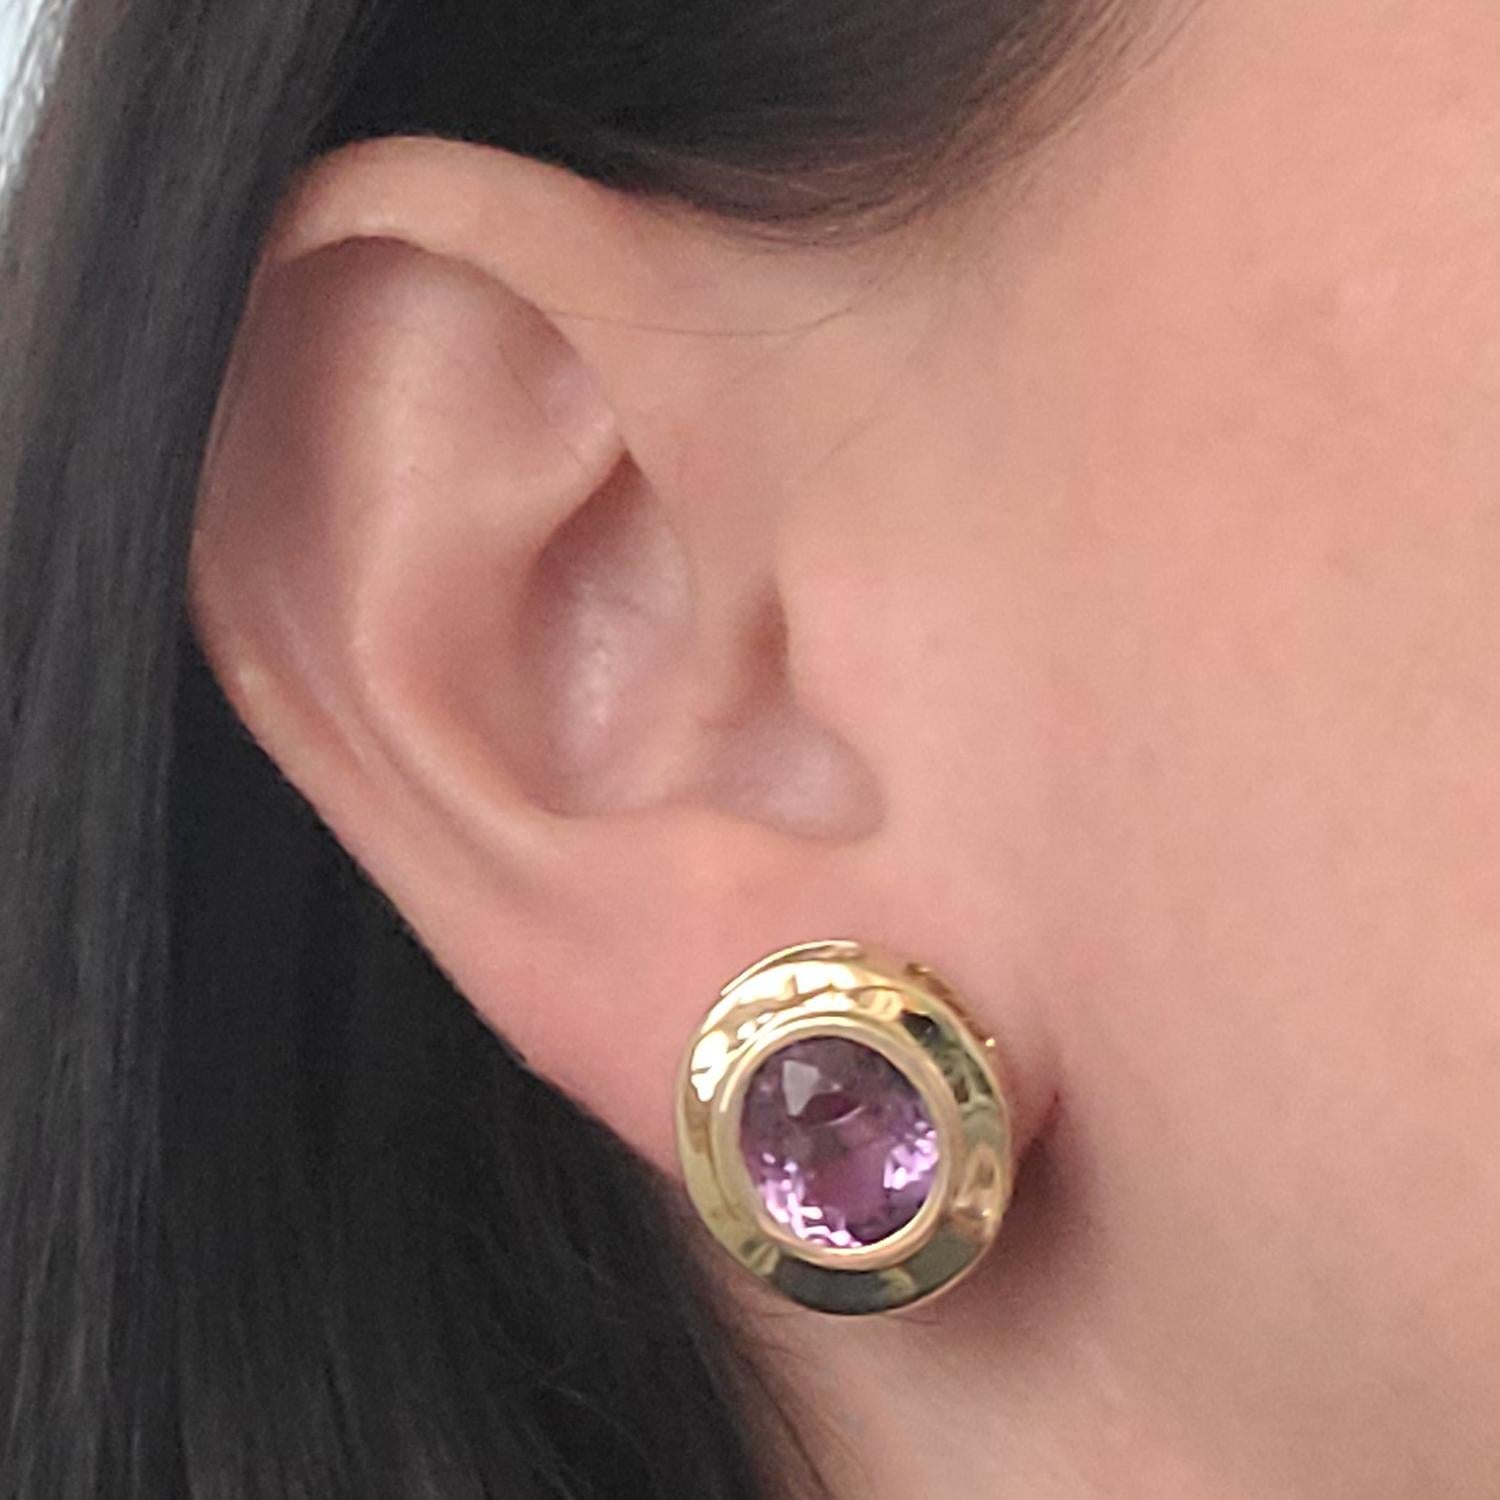 14 Karat Yellow Gold Bezel Stud Earrings Featuring 2 Oval Amethysts Totaling Approximately 6.50 Carats. Pierced Post with Friction Backs. Finished Weight Is 7.0 Grams.